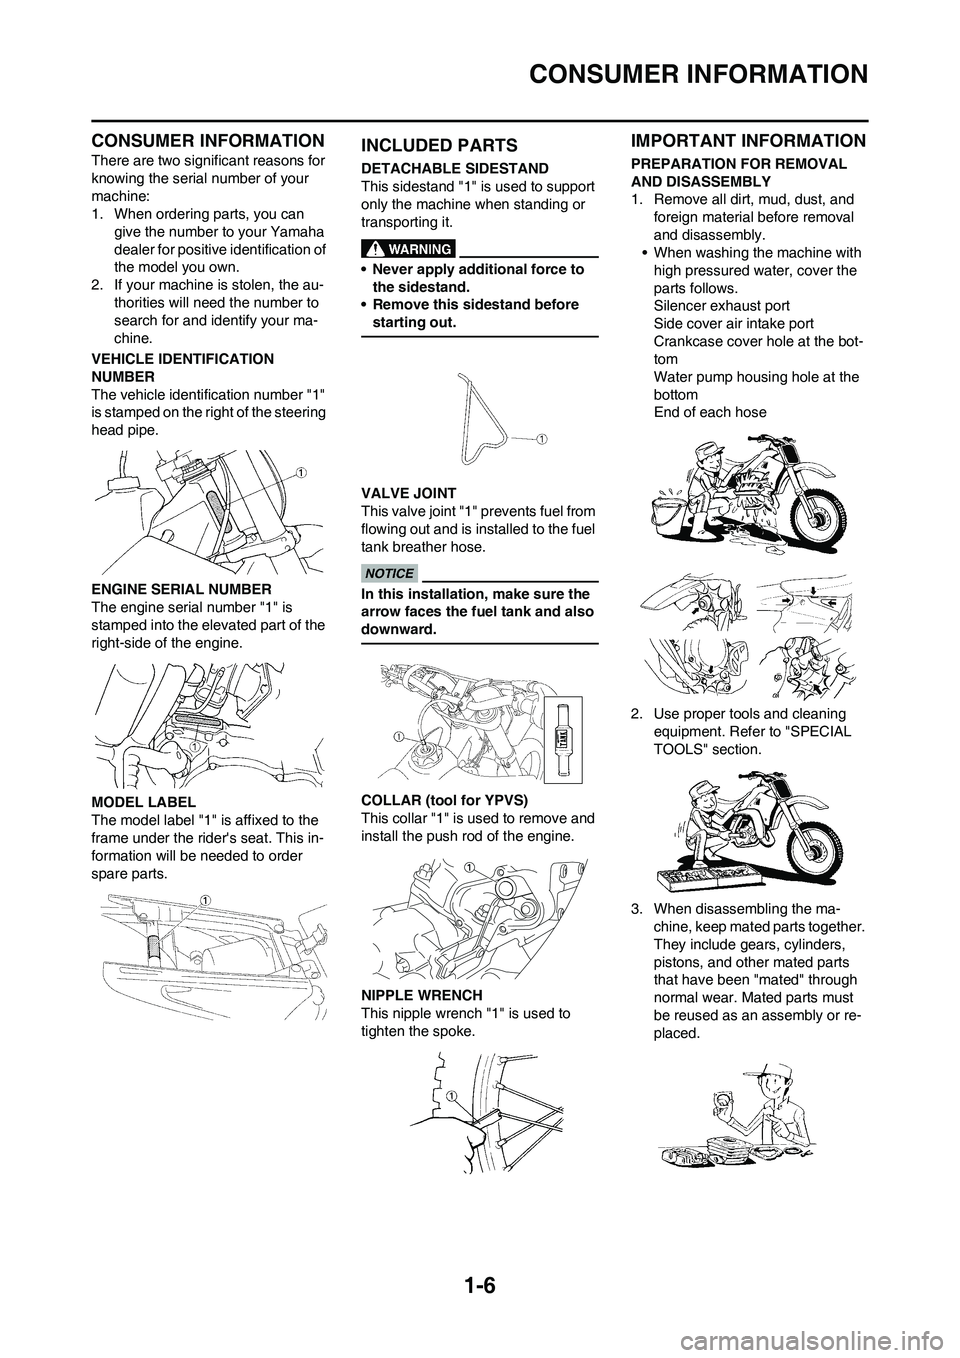 YAMAHA YZ125LC 2010  Owners Manual 1-6
CONSUMER INFORMATION
CONSUMER INFORMATION
There are two significant reasons for 
knowing the serial number of your 
machine:
1. When ordering parts, you can 
give the number to your Yamaha 
dealer